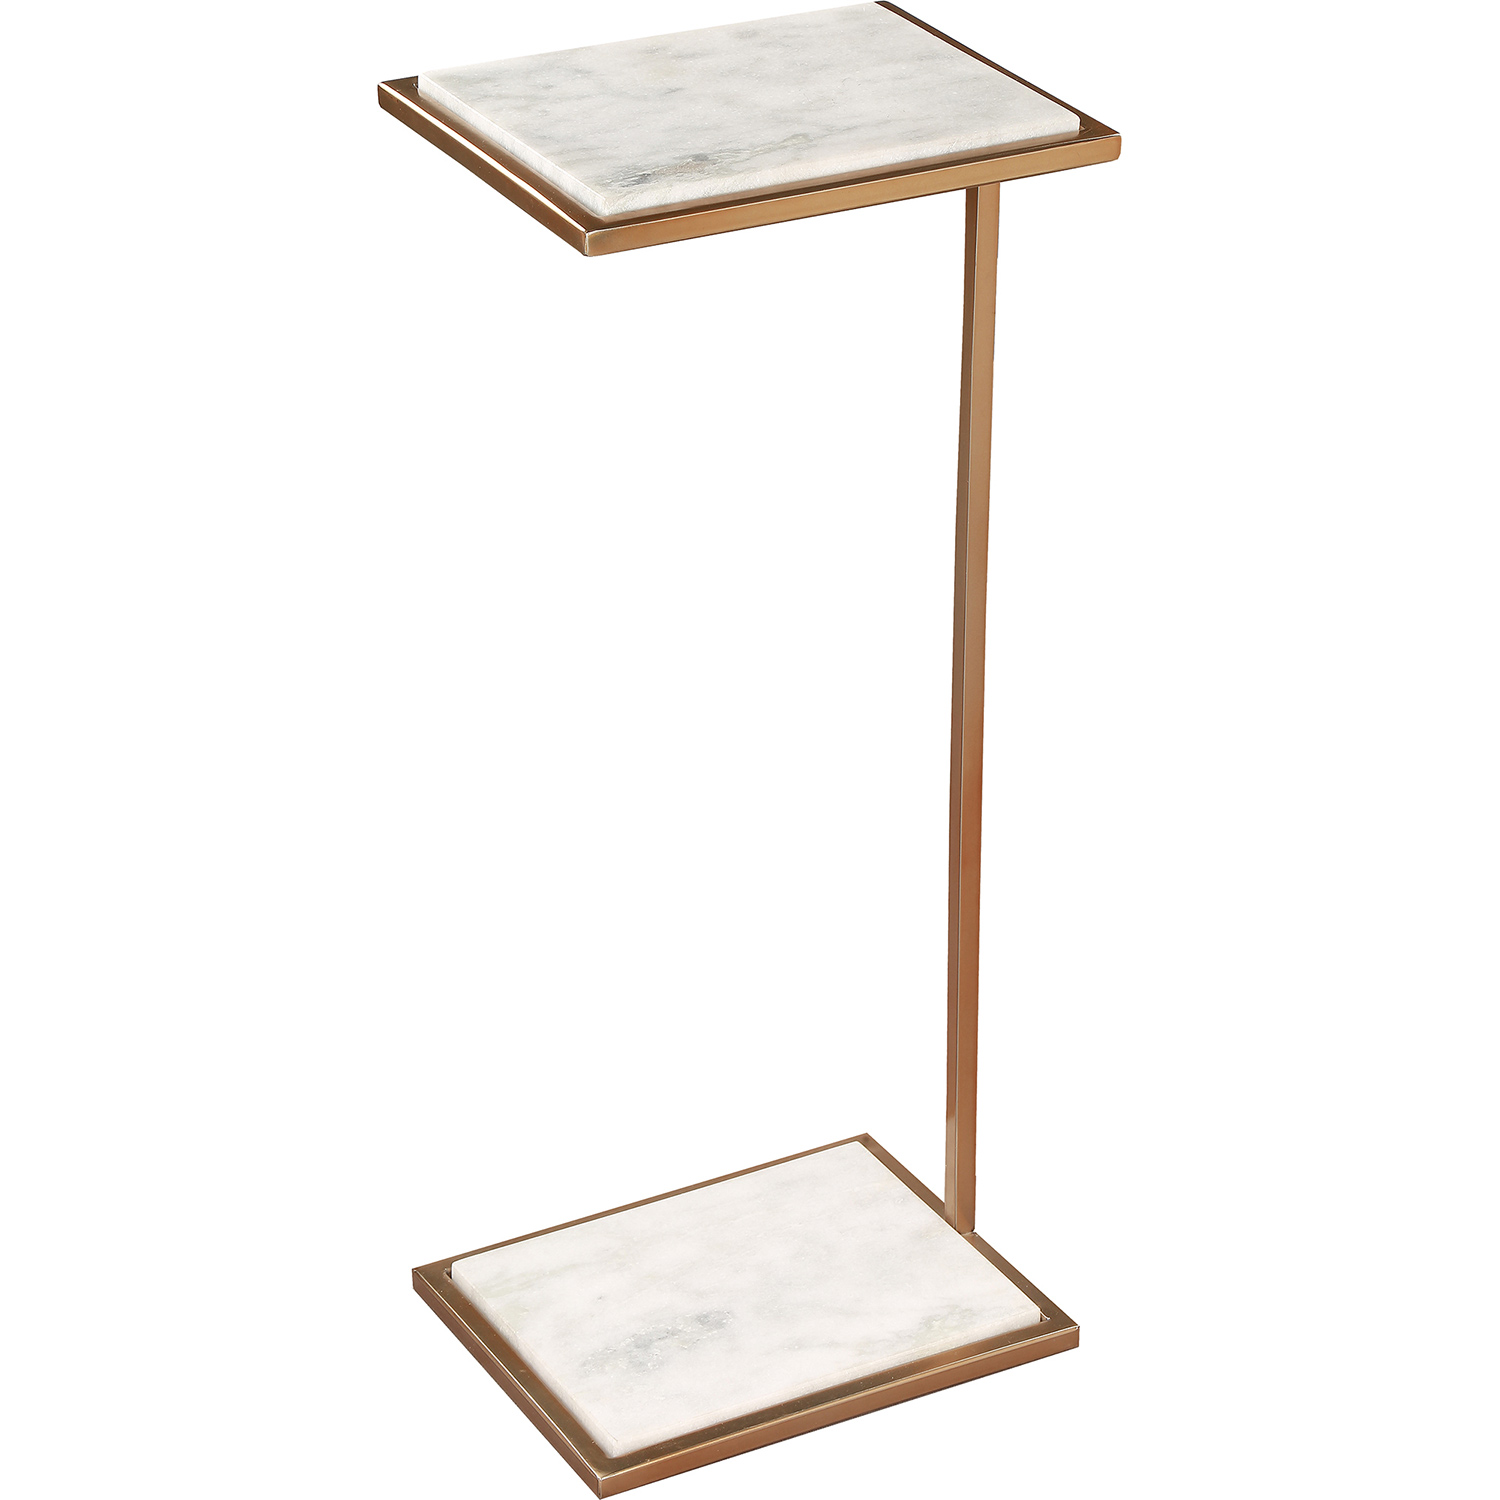 Ren-Wil Delma Accent Table - White Marble/Brass